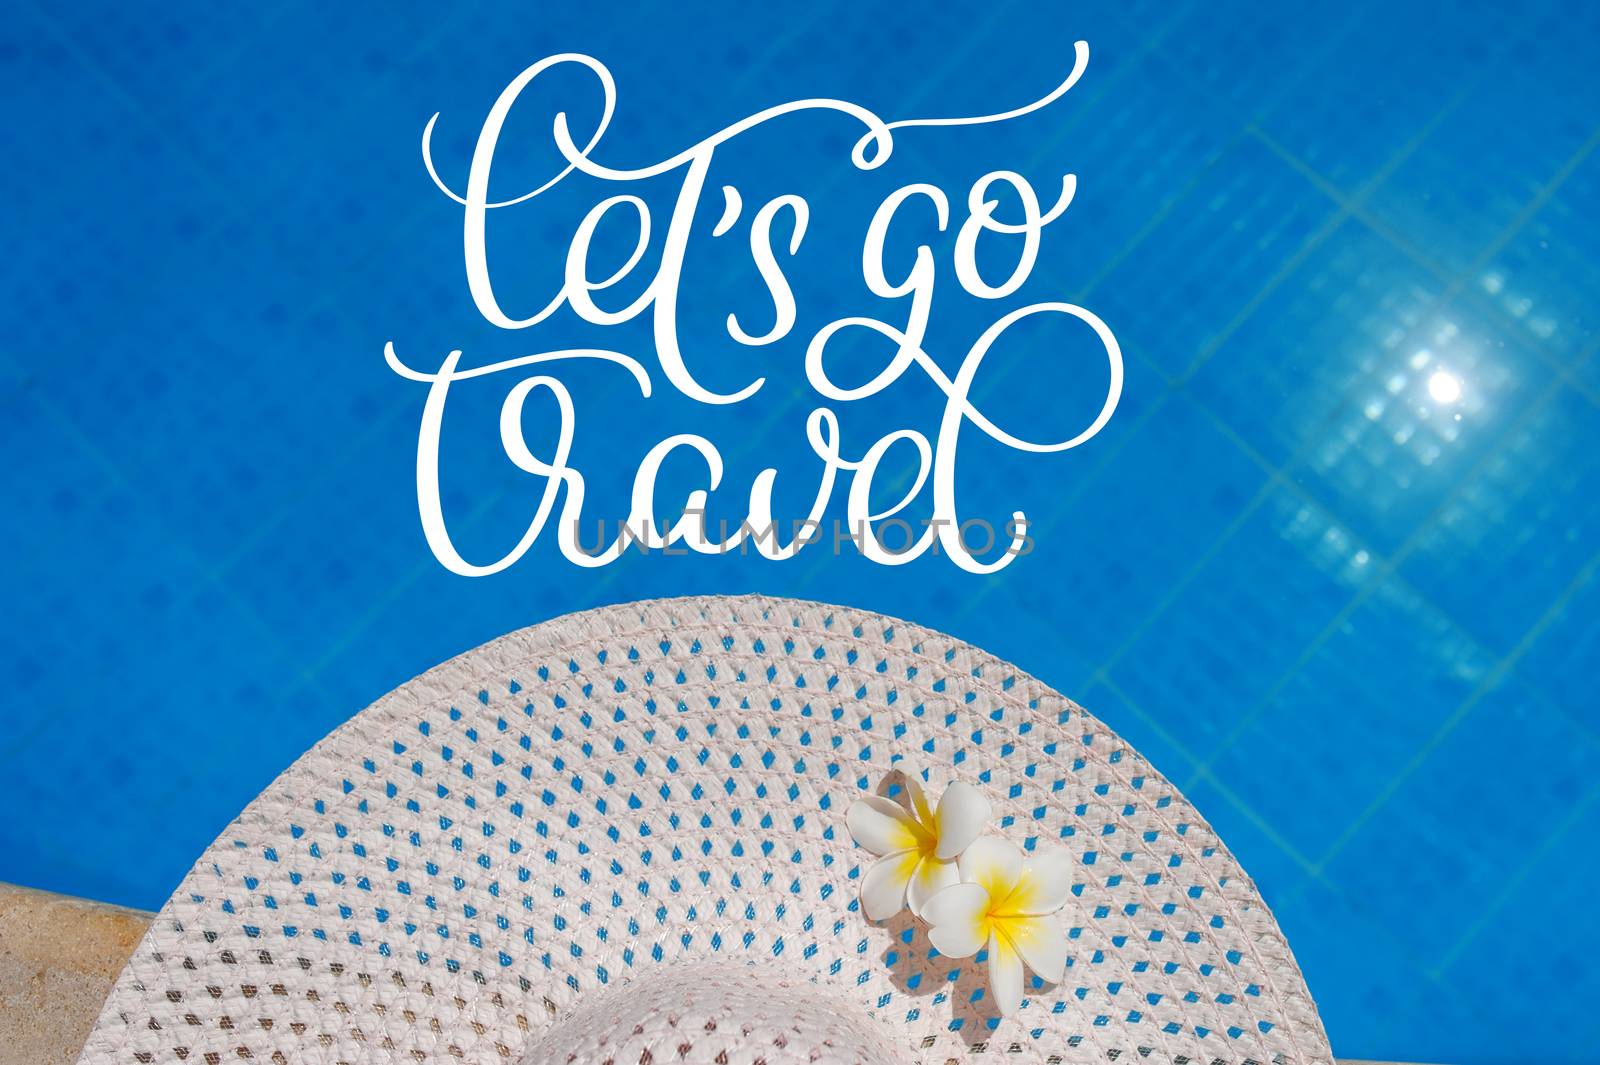 Big white hat on the edge of the pool and text Lets go travel. Calligraphy lettering hand draw by timonko